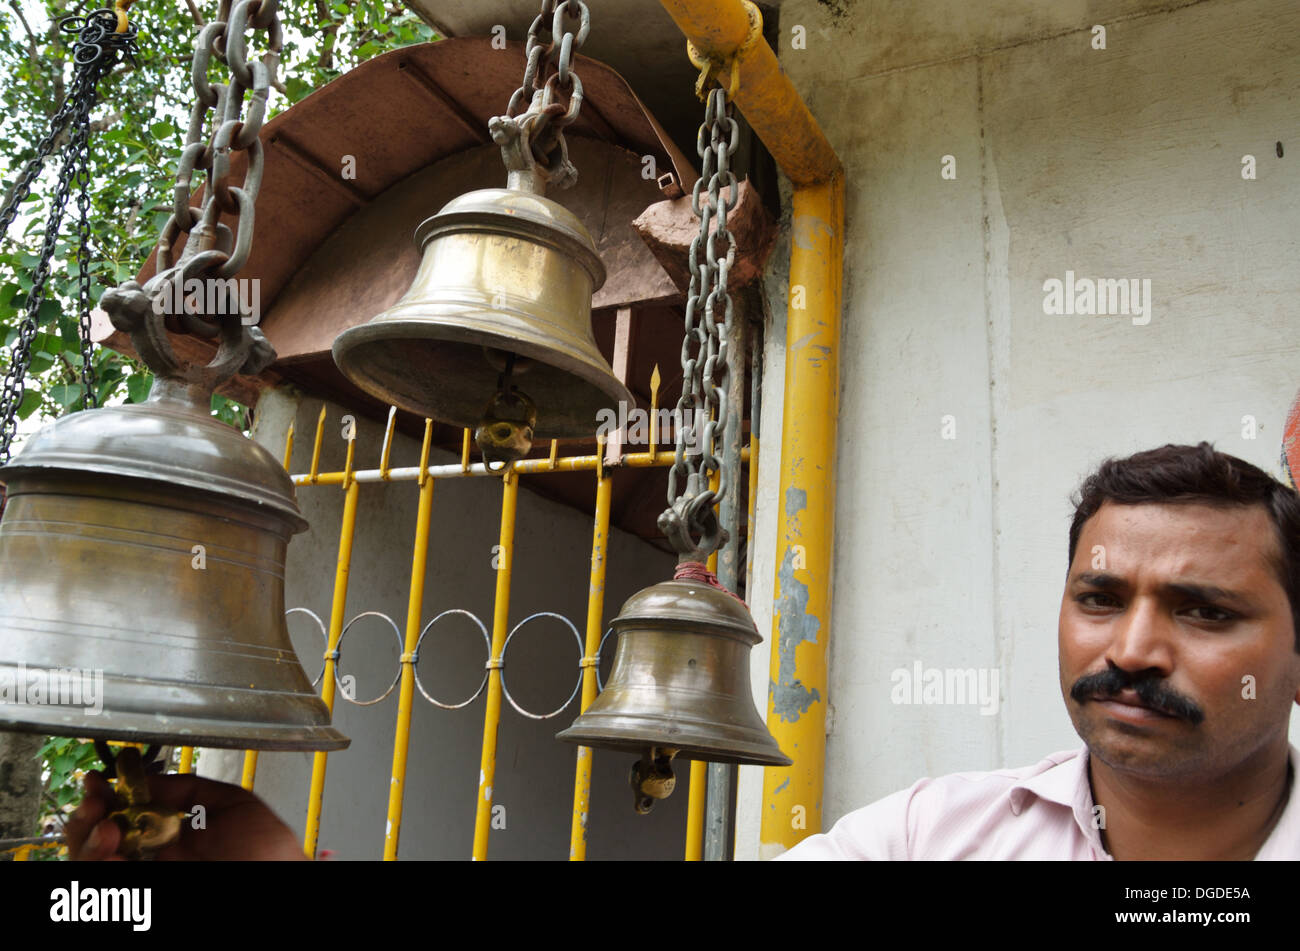 The Temple Bell - It is not just any other bell